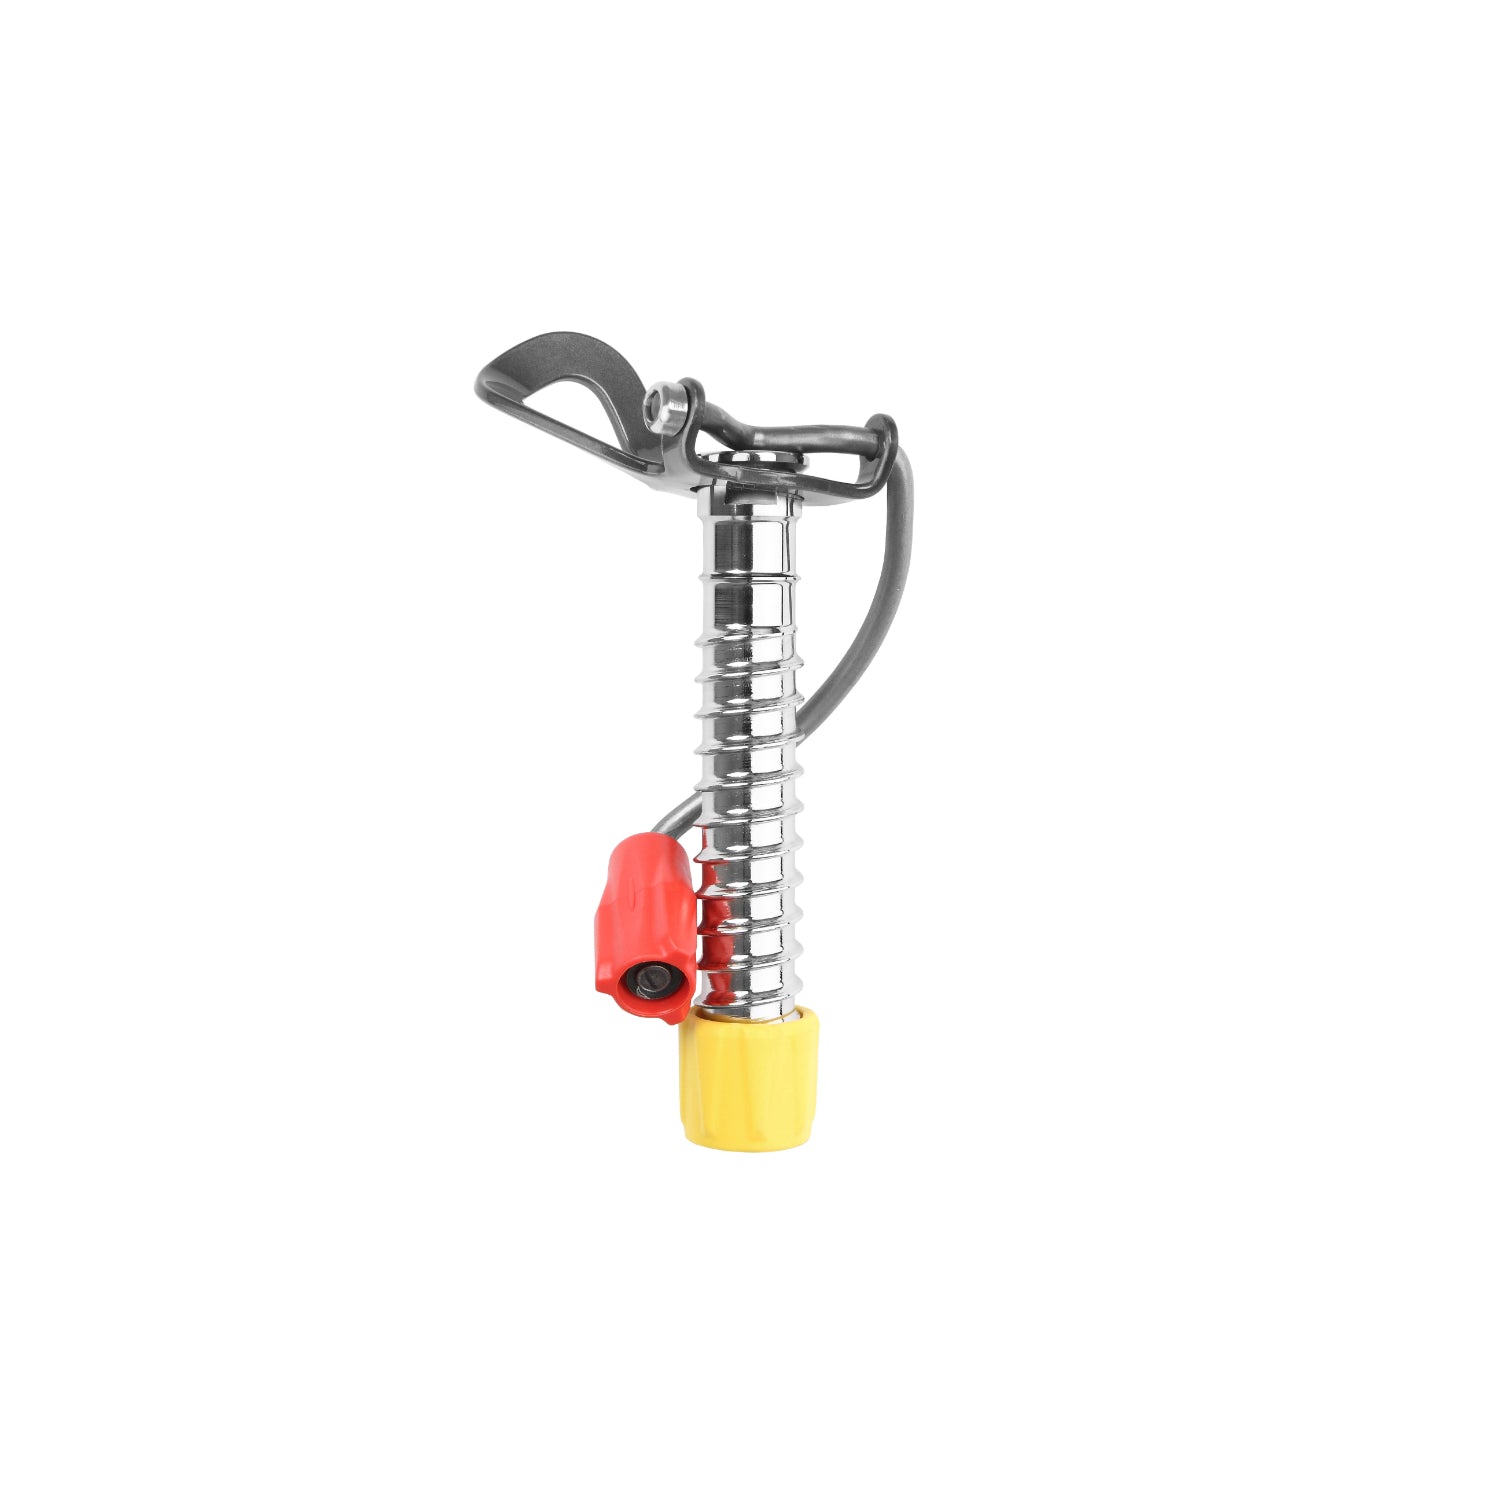 Grivel 360 Ice Screw Short, with silver screw and red tag